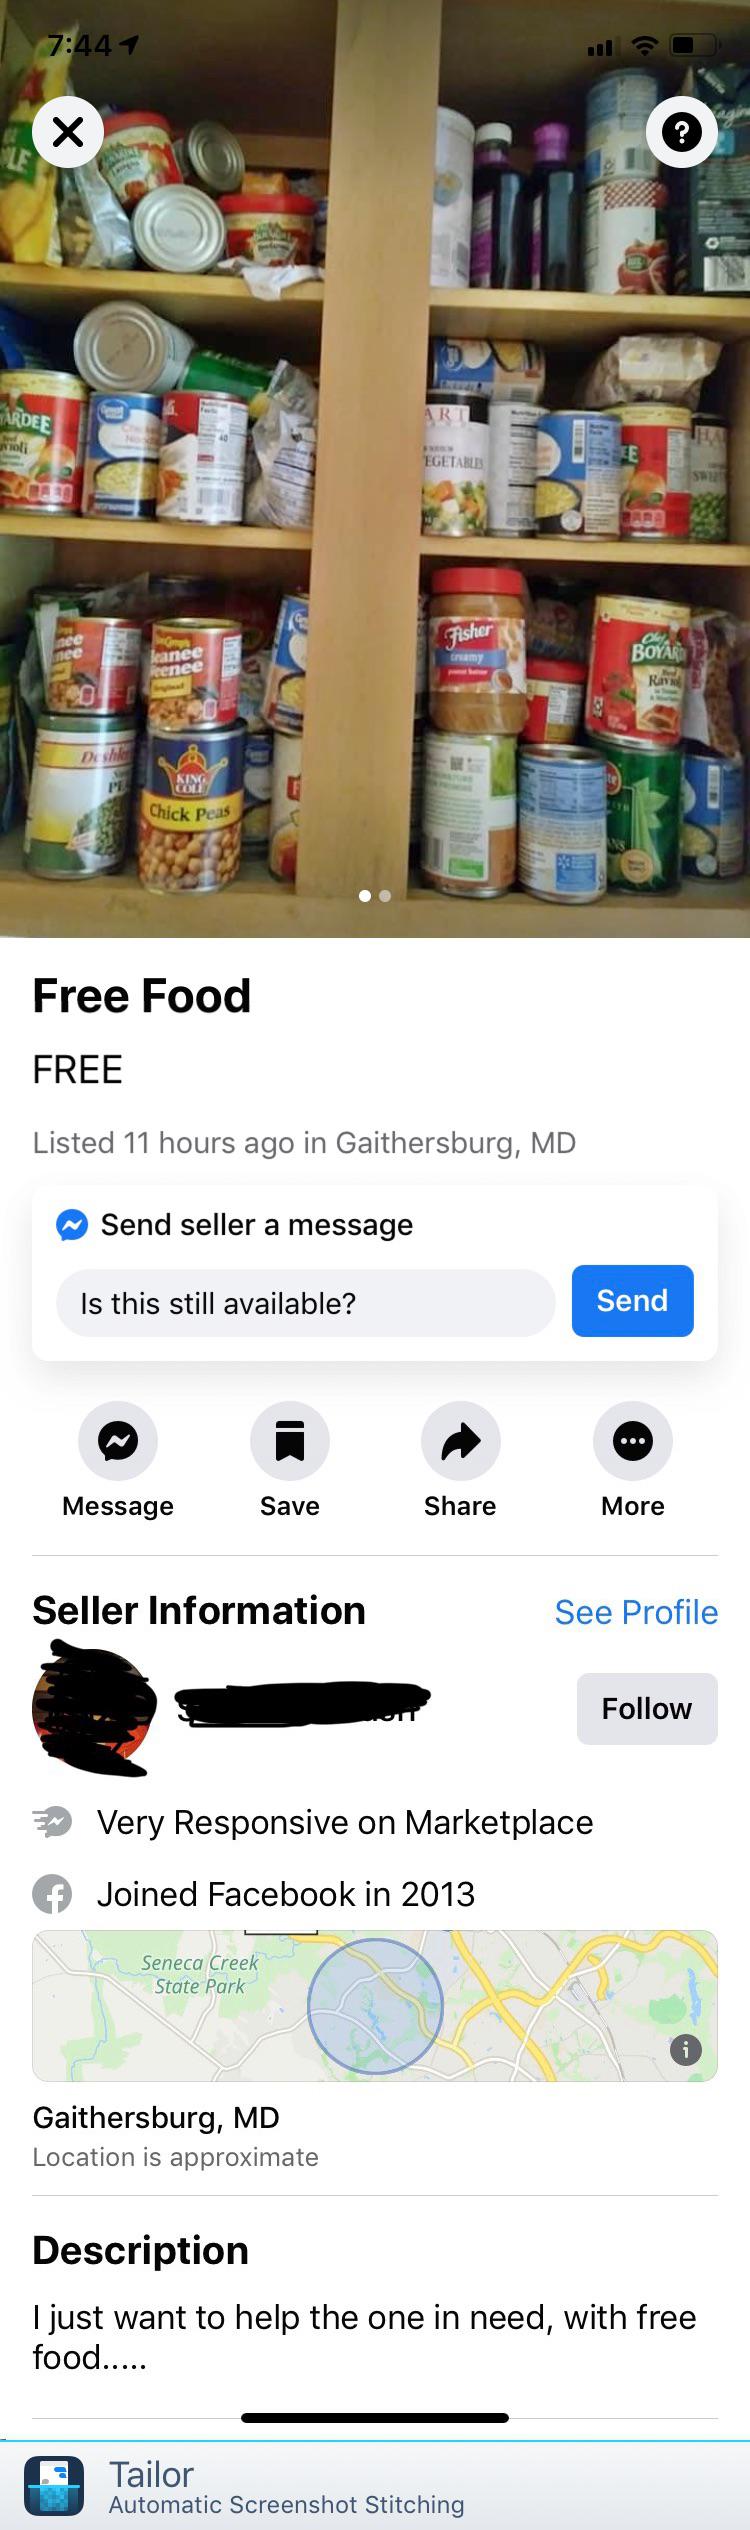 web page - Ari Sardee violi Egetables Fisher Boyar Rann P Sini Chick Peas Free Food Free Listed 11 hours ago in Gaithersburg, Md Send seller a message Is this still available? Send Message Save More Seller Information See Profile Very Responsive on Market